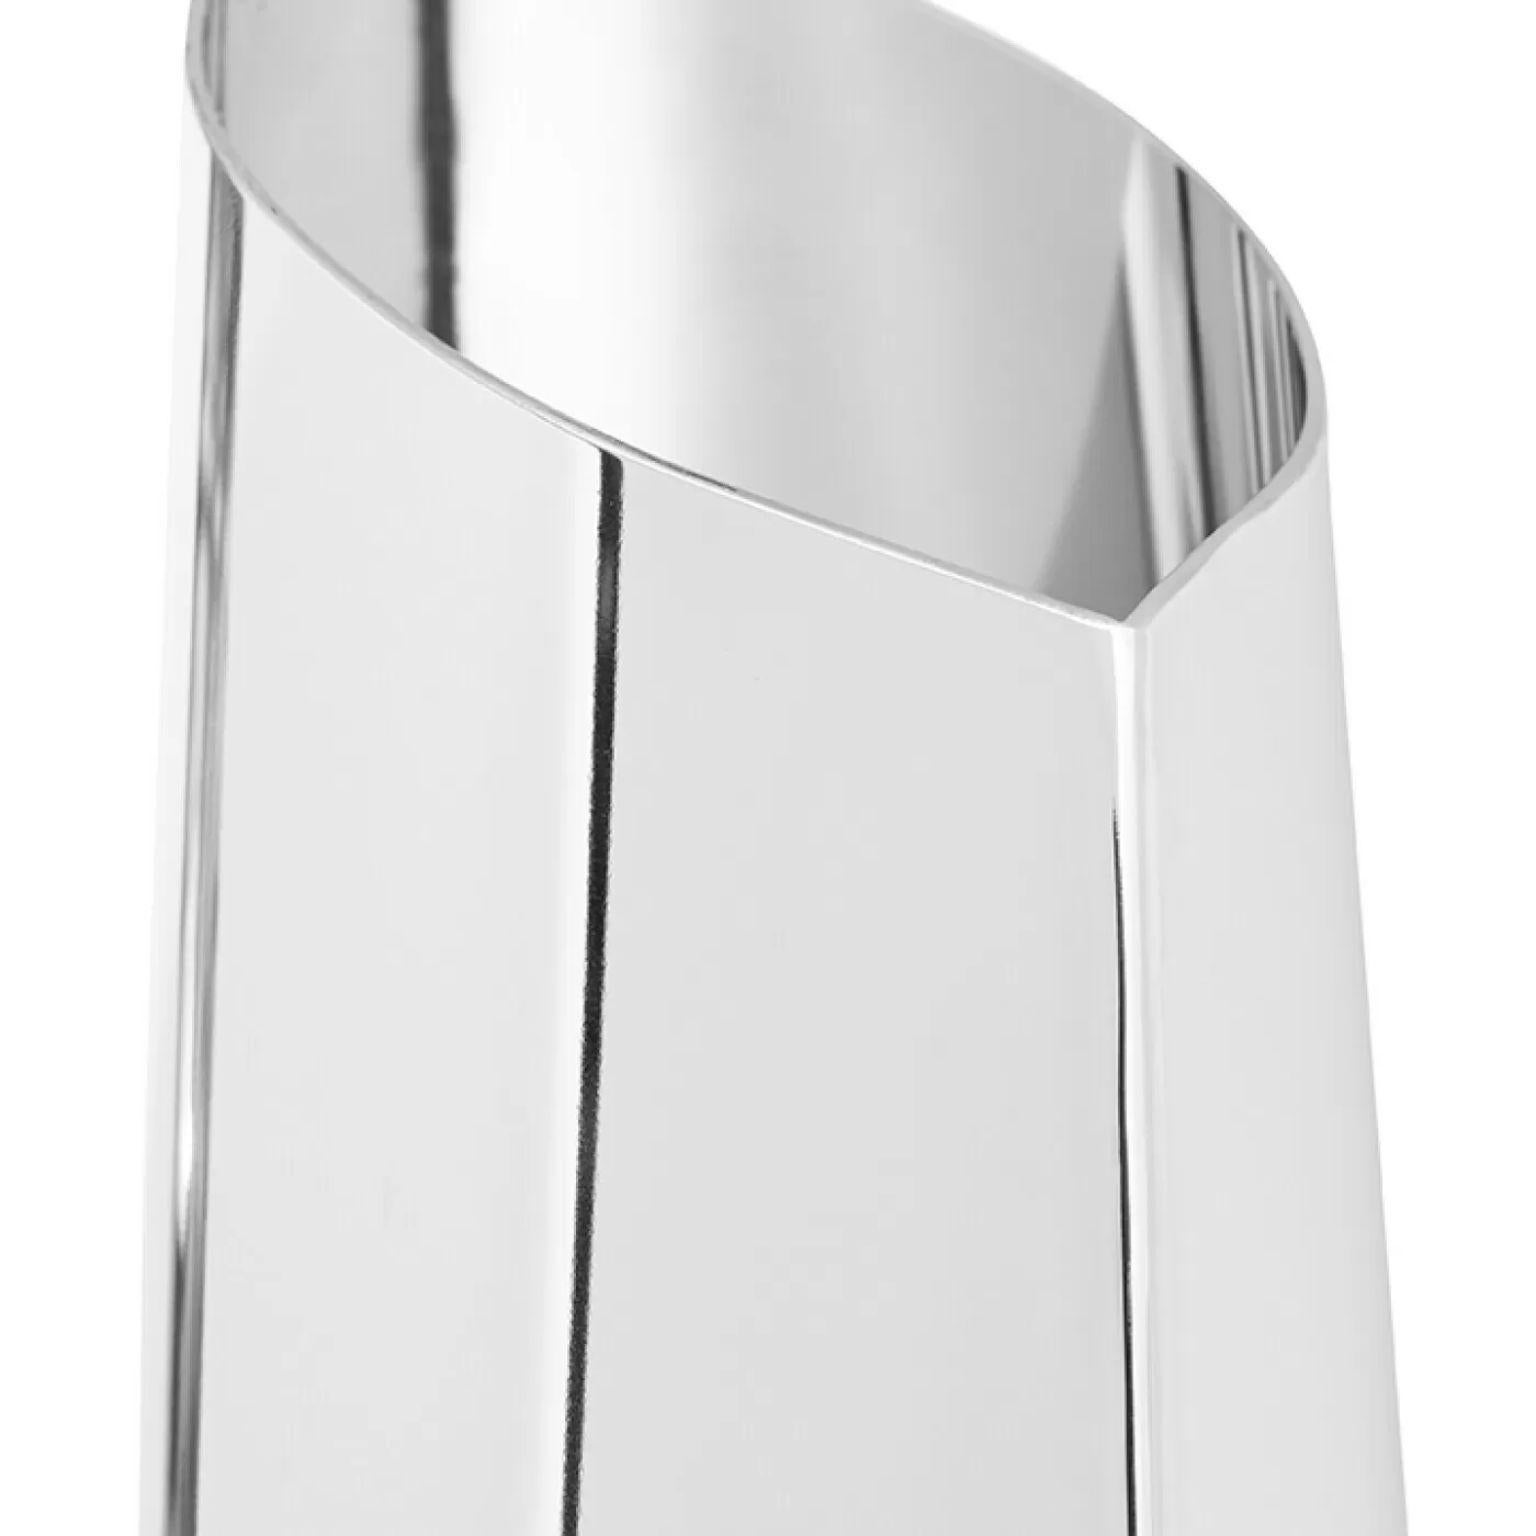 Stainless Steel Parova Flamed Gold L35 Vase by Zieta For Sale